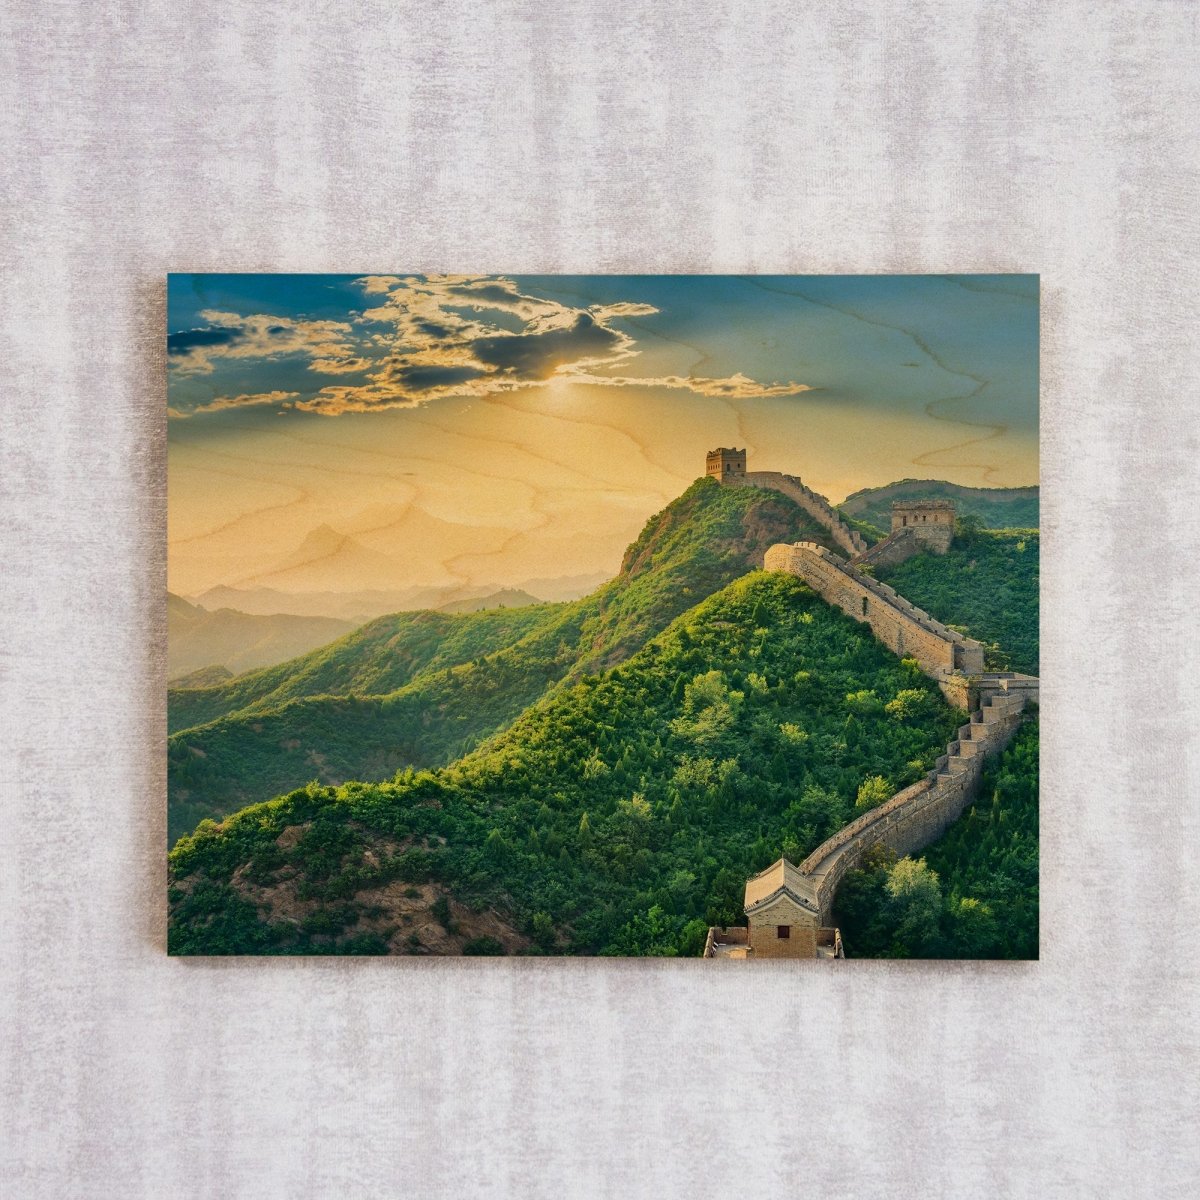 THE GREAT WALL OF CHINA - cmzart